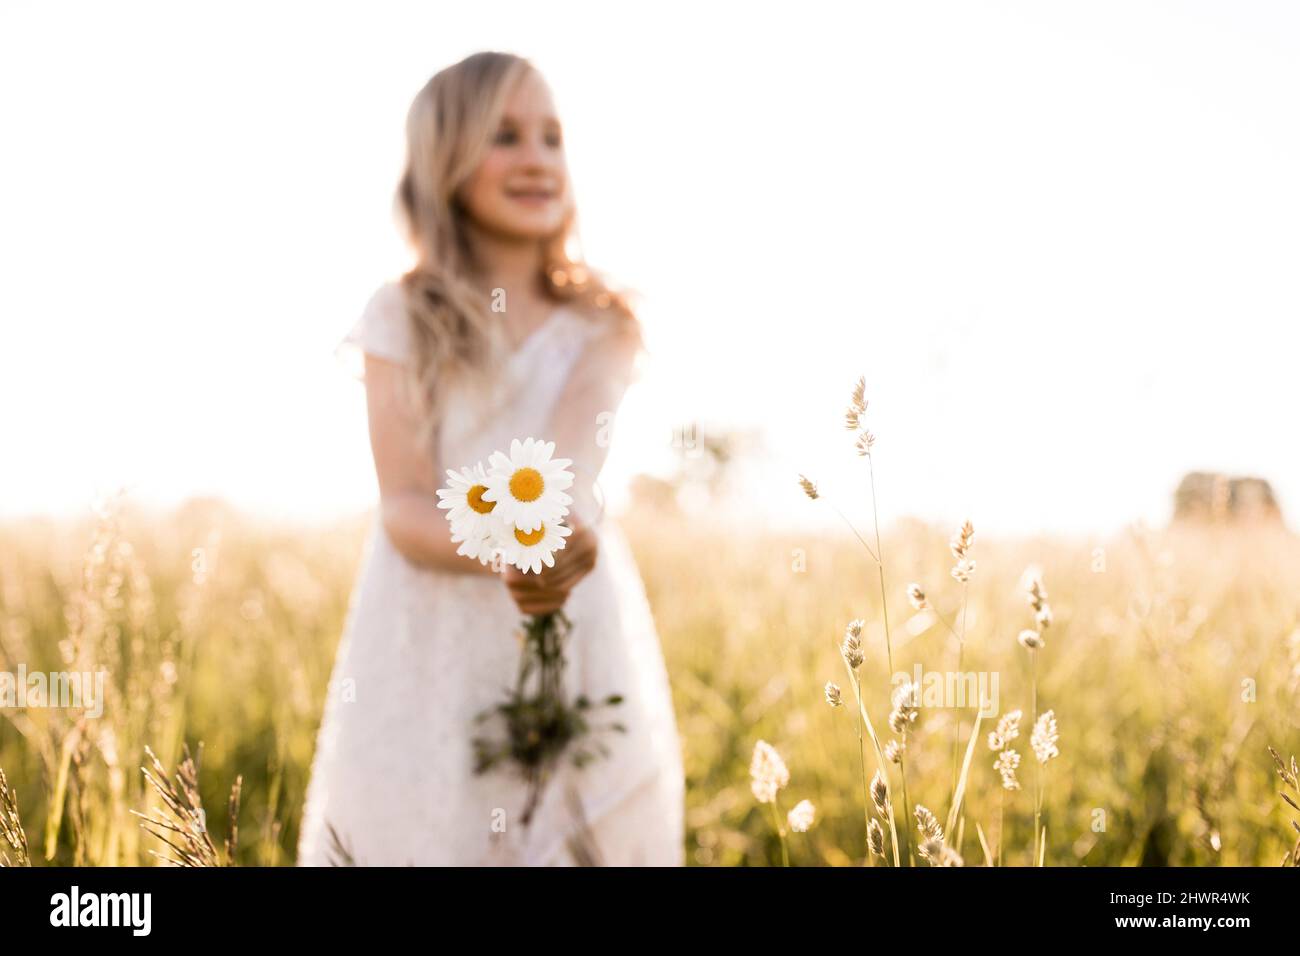 Girl holding daisy flowers in nature Stock Photo